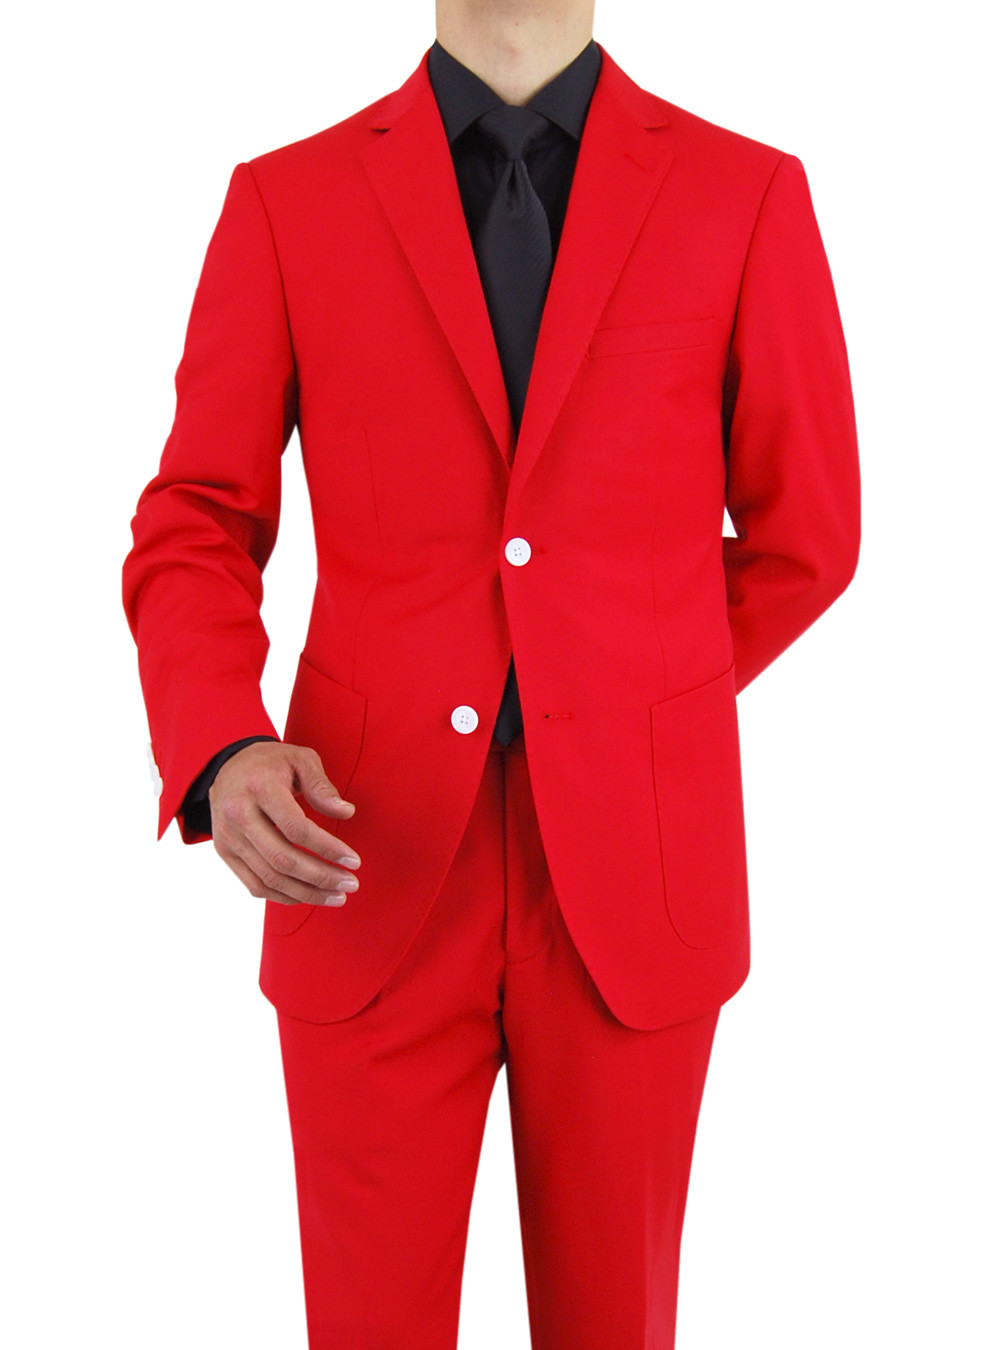 Flamboyant Red Blazer – The Suit People